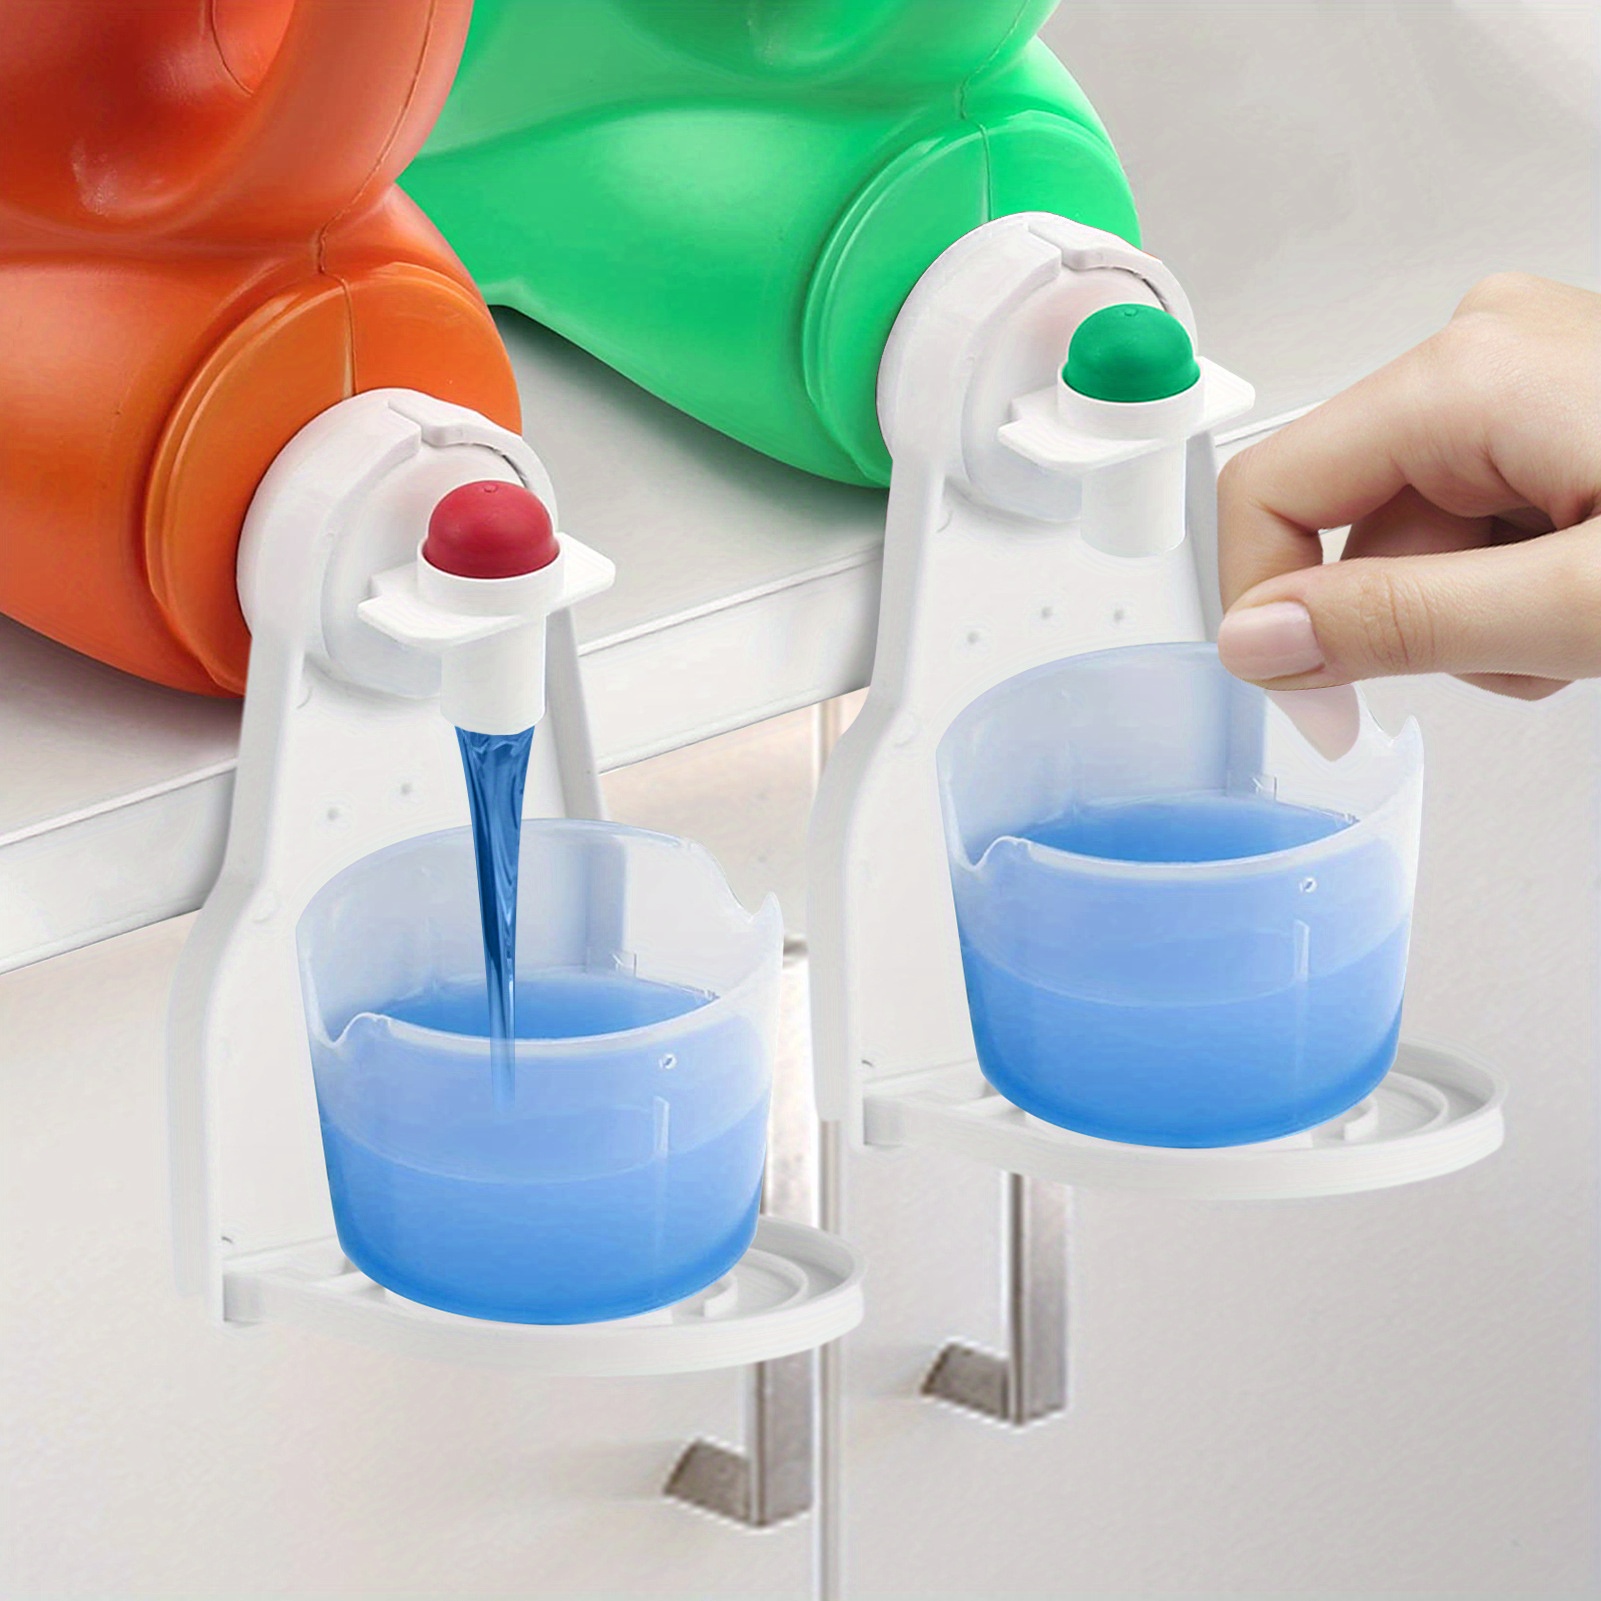 1pc drip catcher for laundry detergent bottles screw design holds firmly fits most economical sizes keeps washer dryer and floor clean details 0